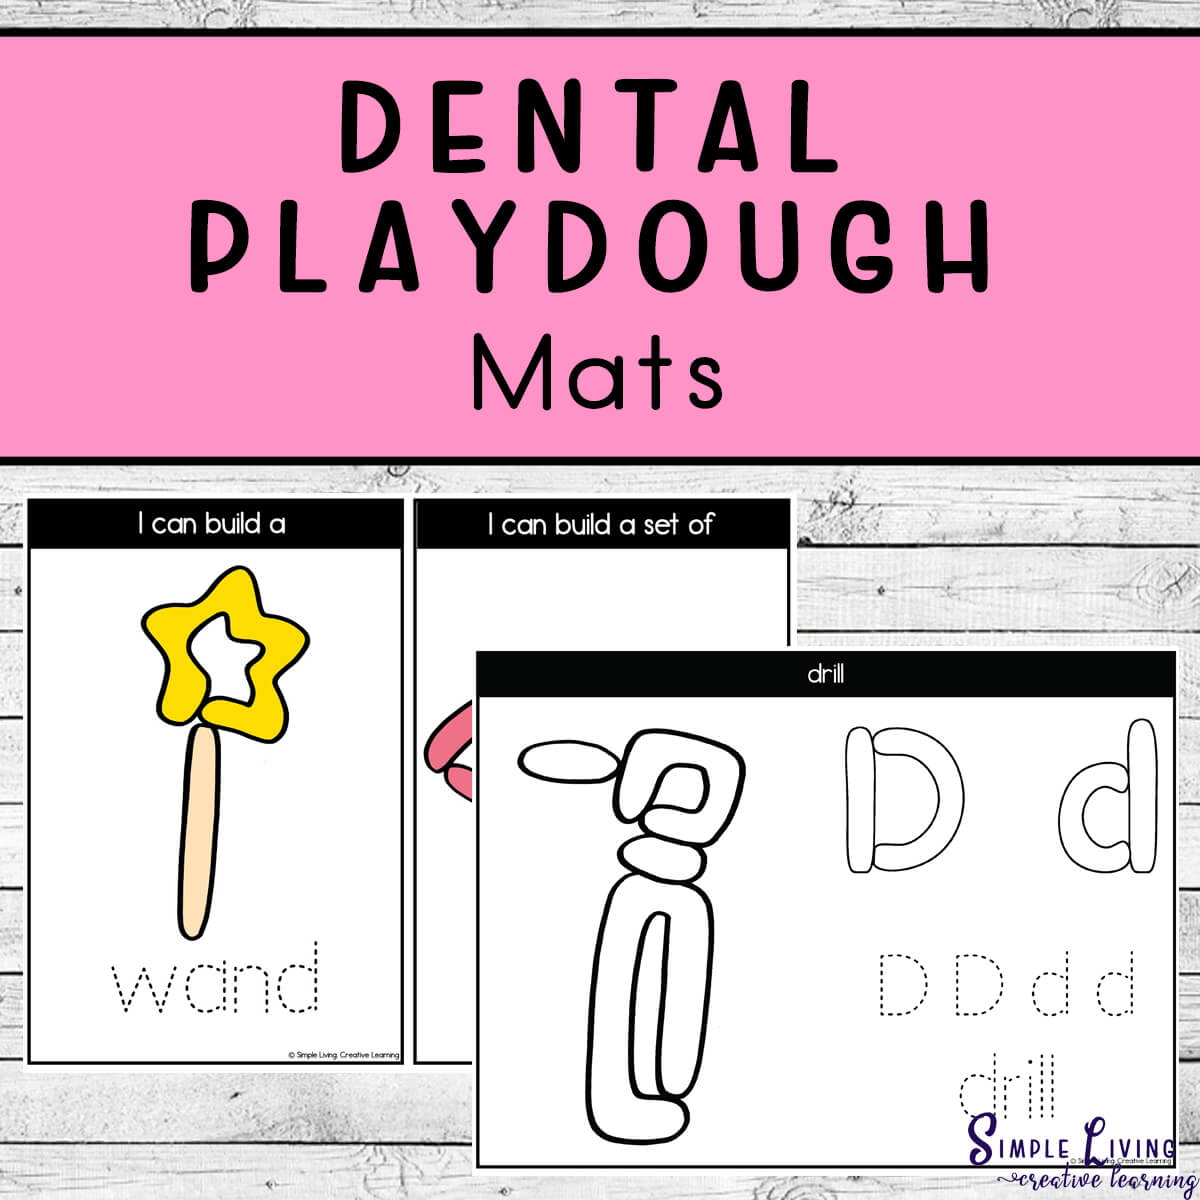 Dental Playdough Mats one colour and one black and white mat